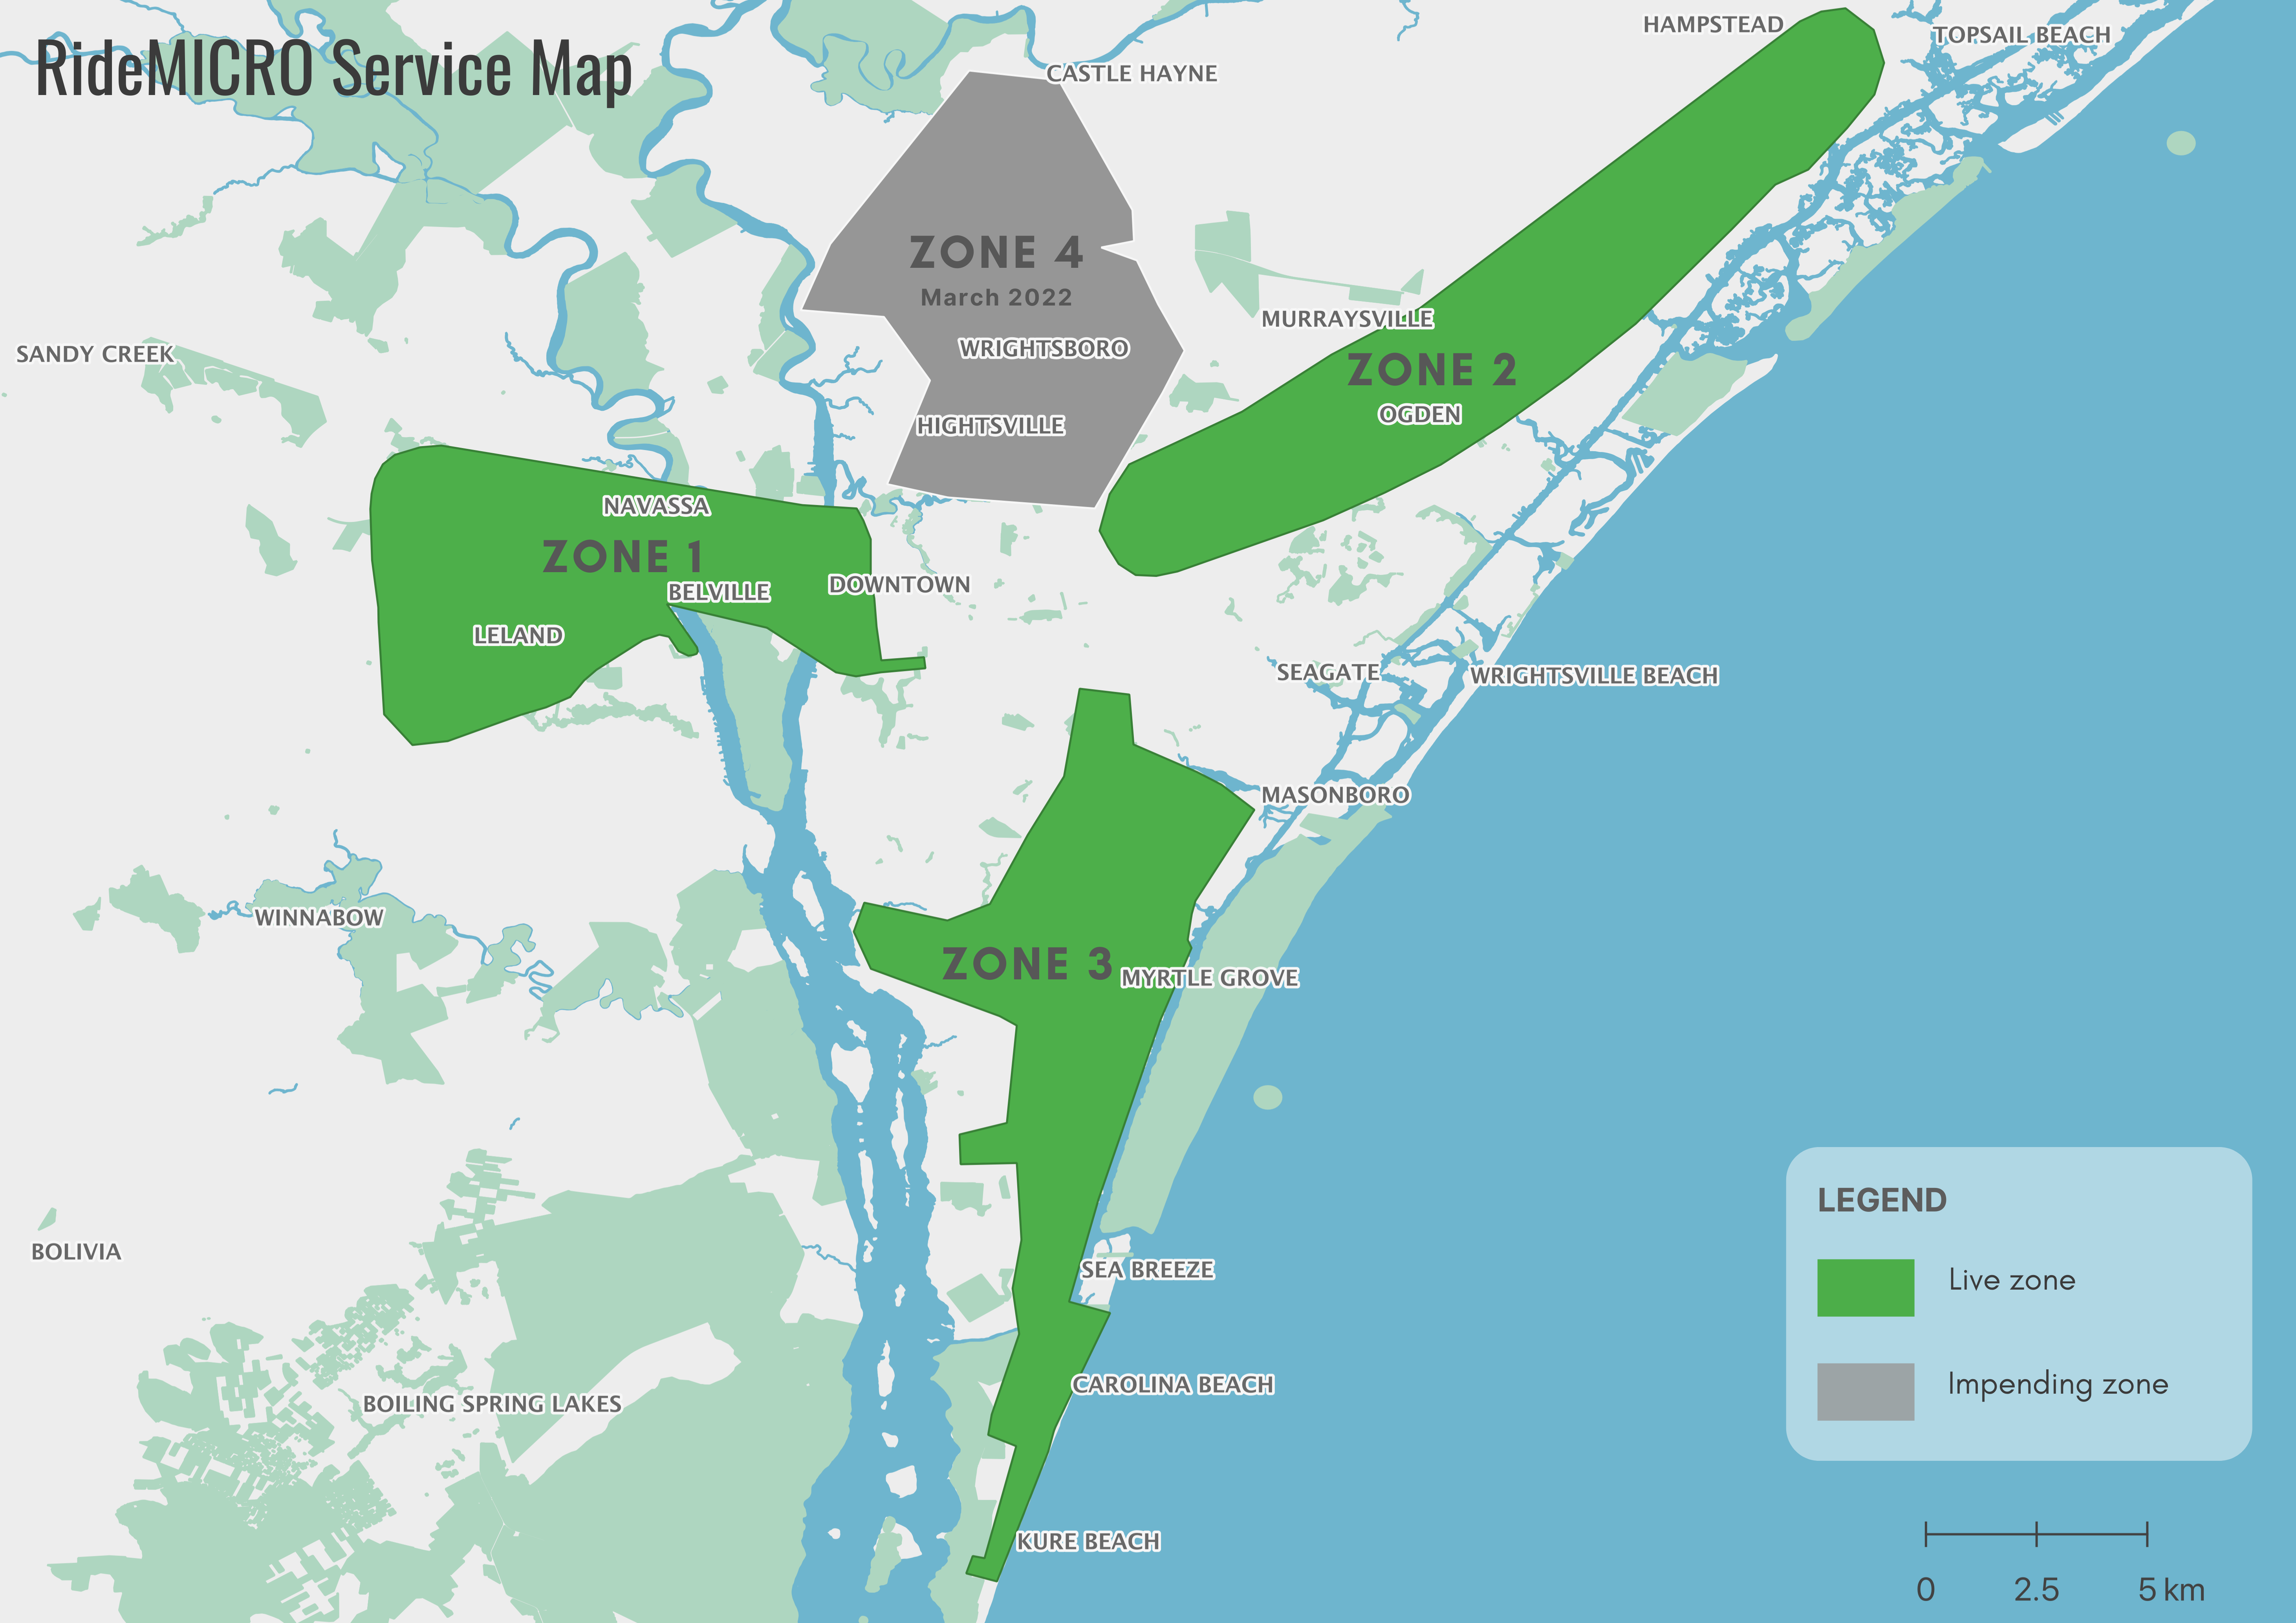 Zoomed out map of New Hanover County, portions of Brunswick County, and portions of Pender County. Map is marked with all 4 RideMICRO zones, with the three active zones in green and the inactive zone in gray.